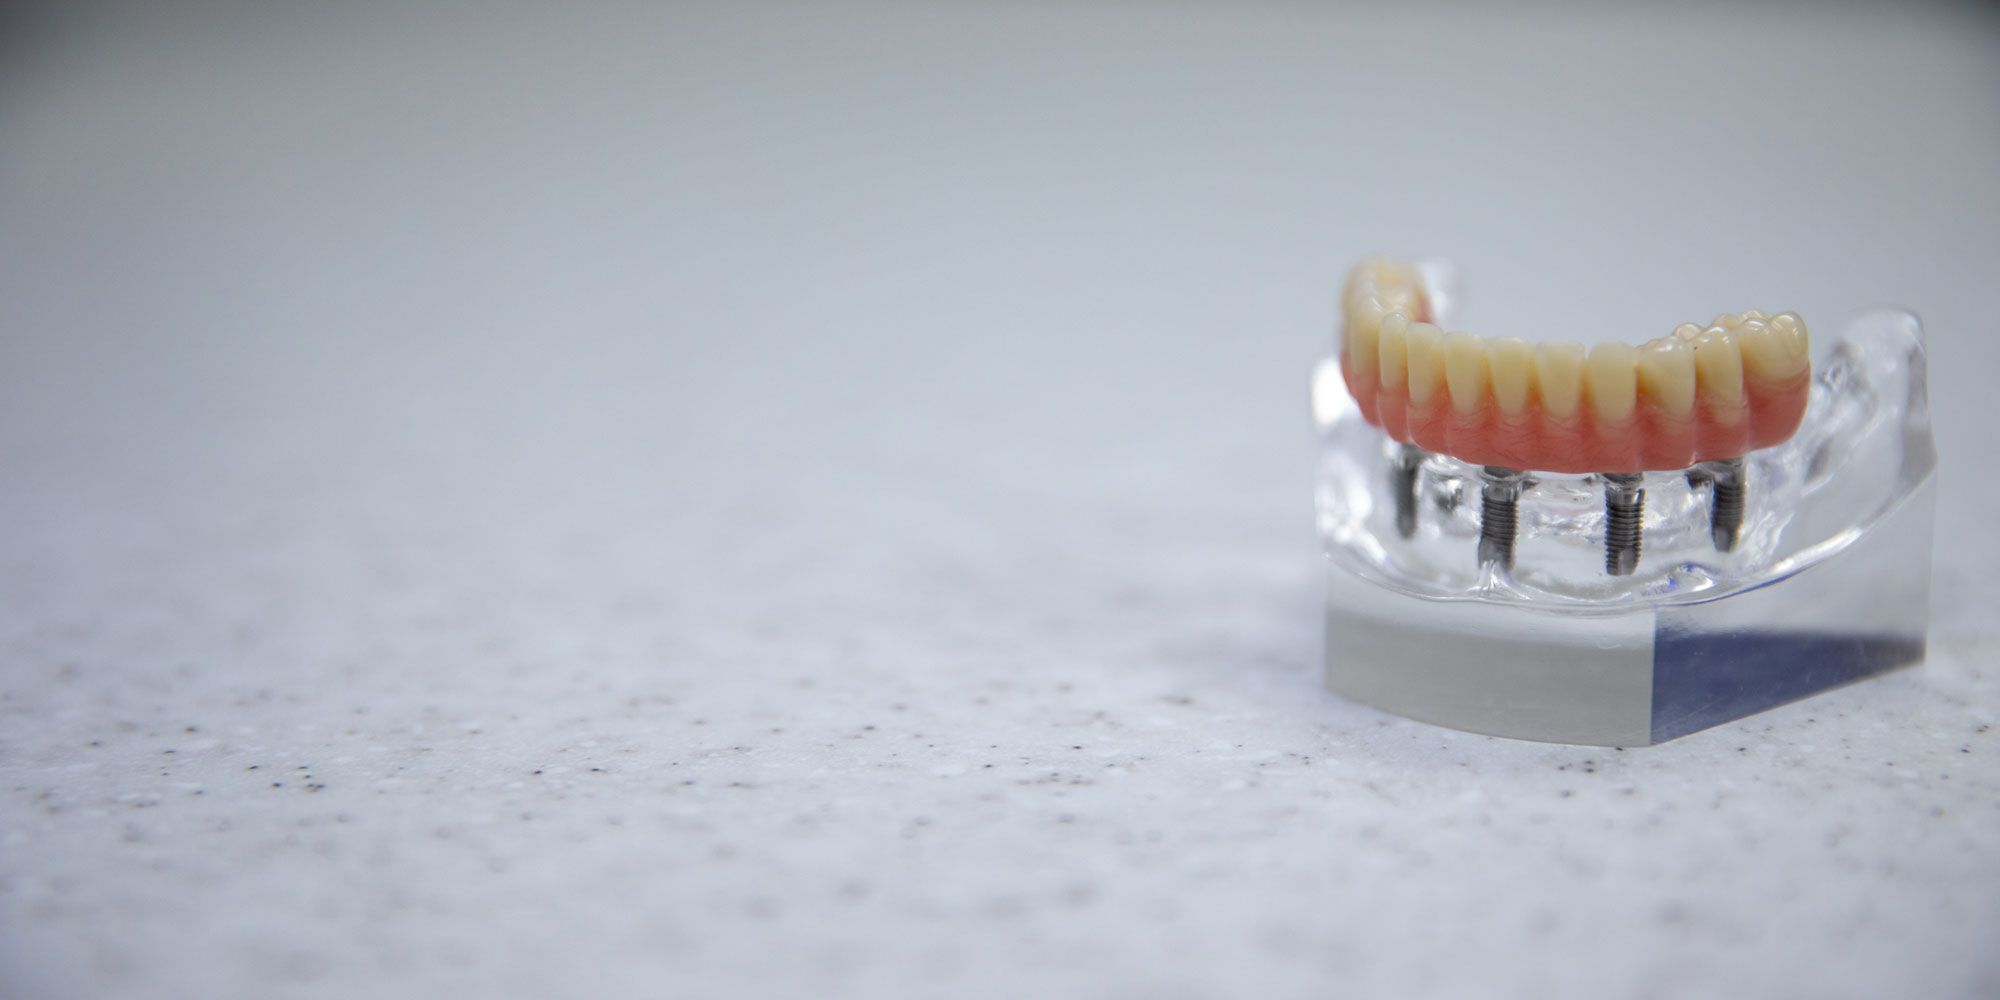 fullmouth dentalimplant on table